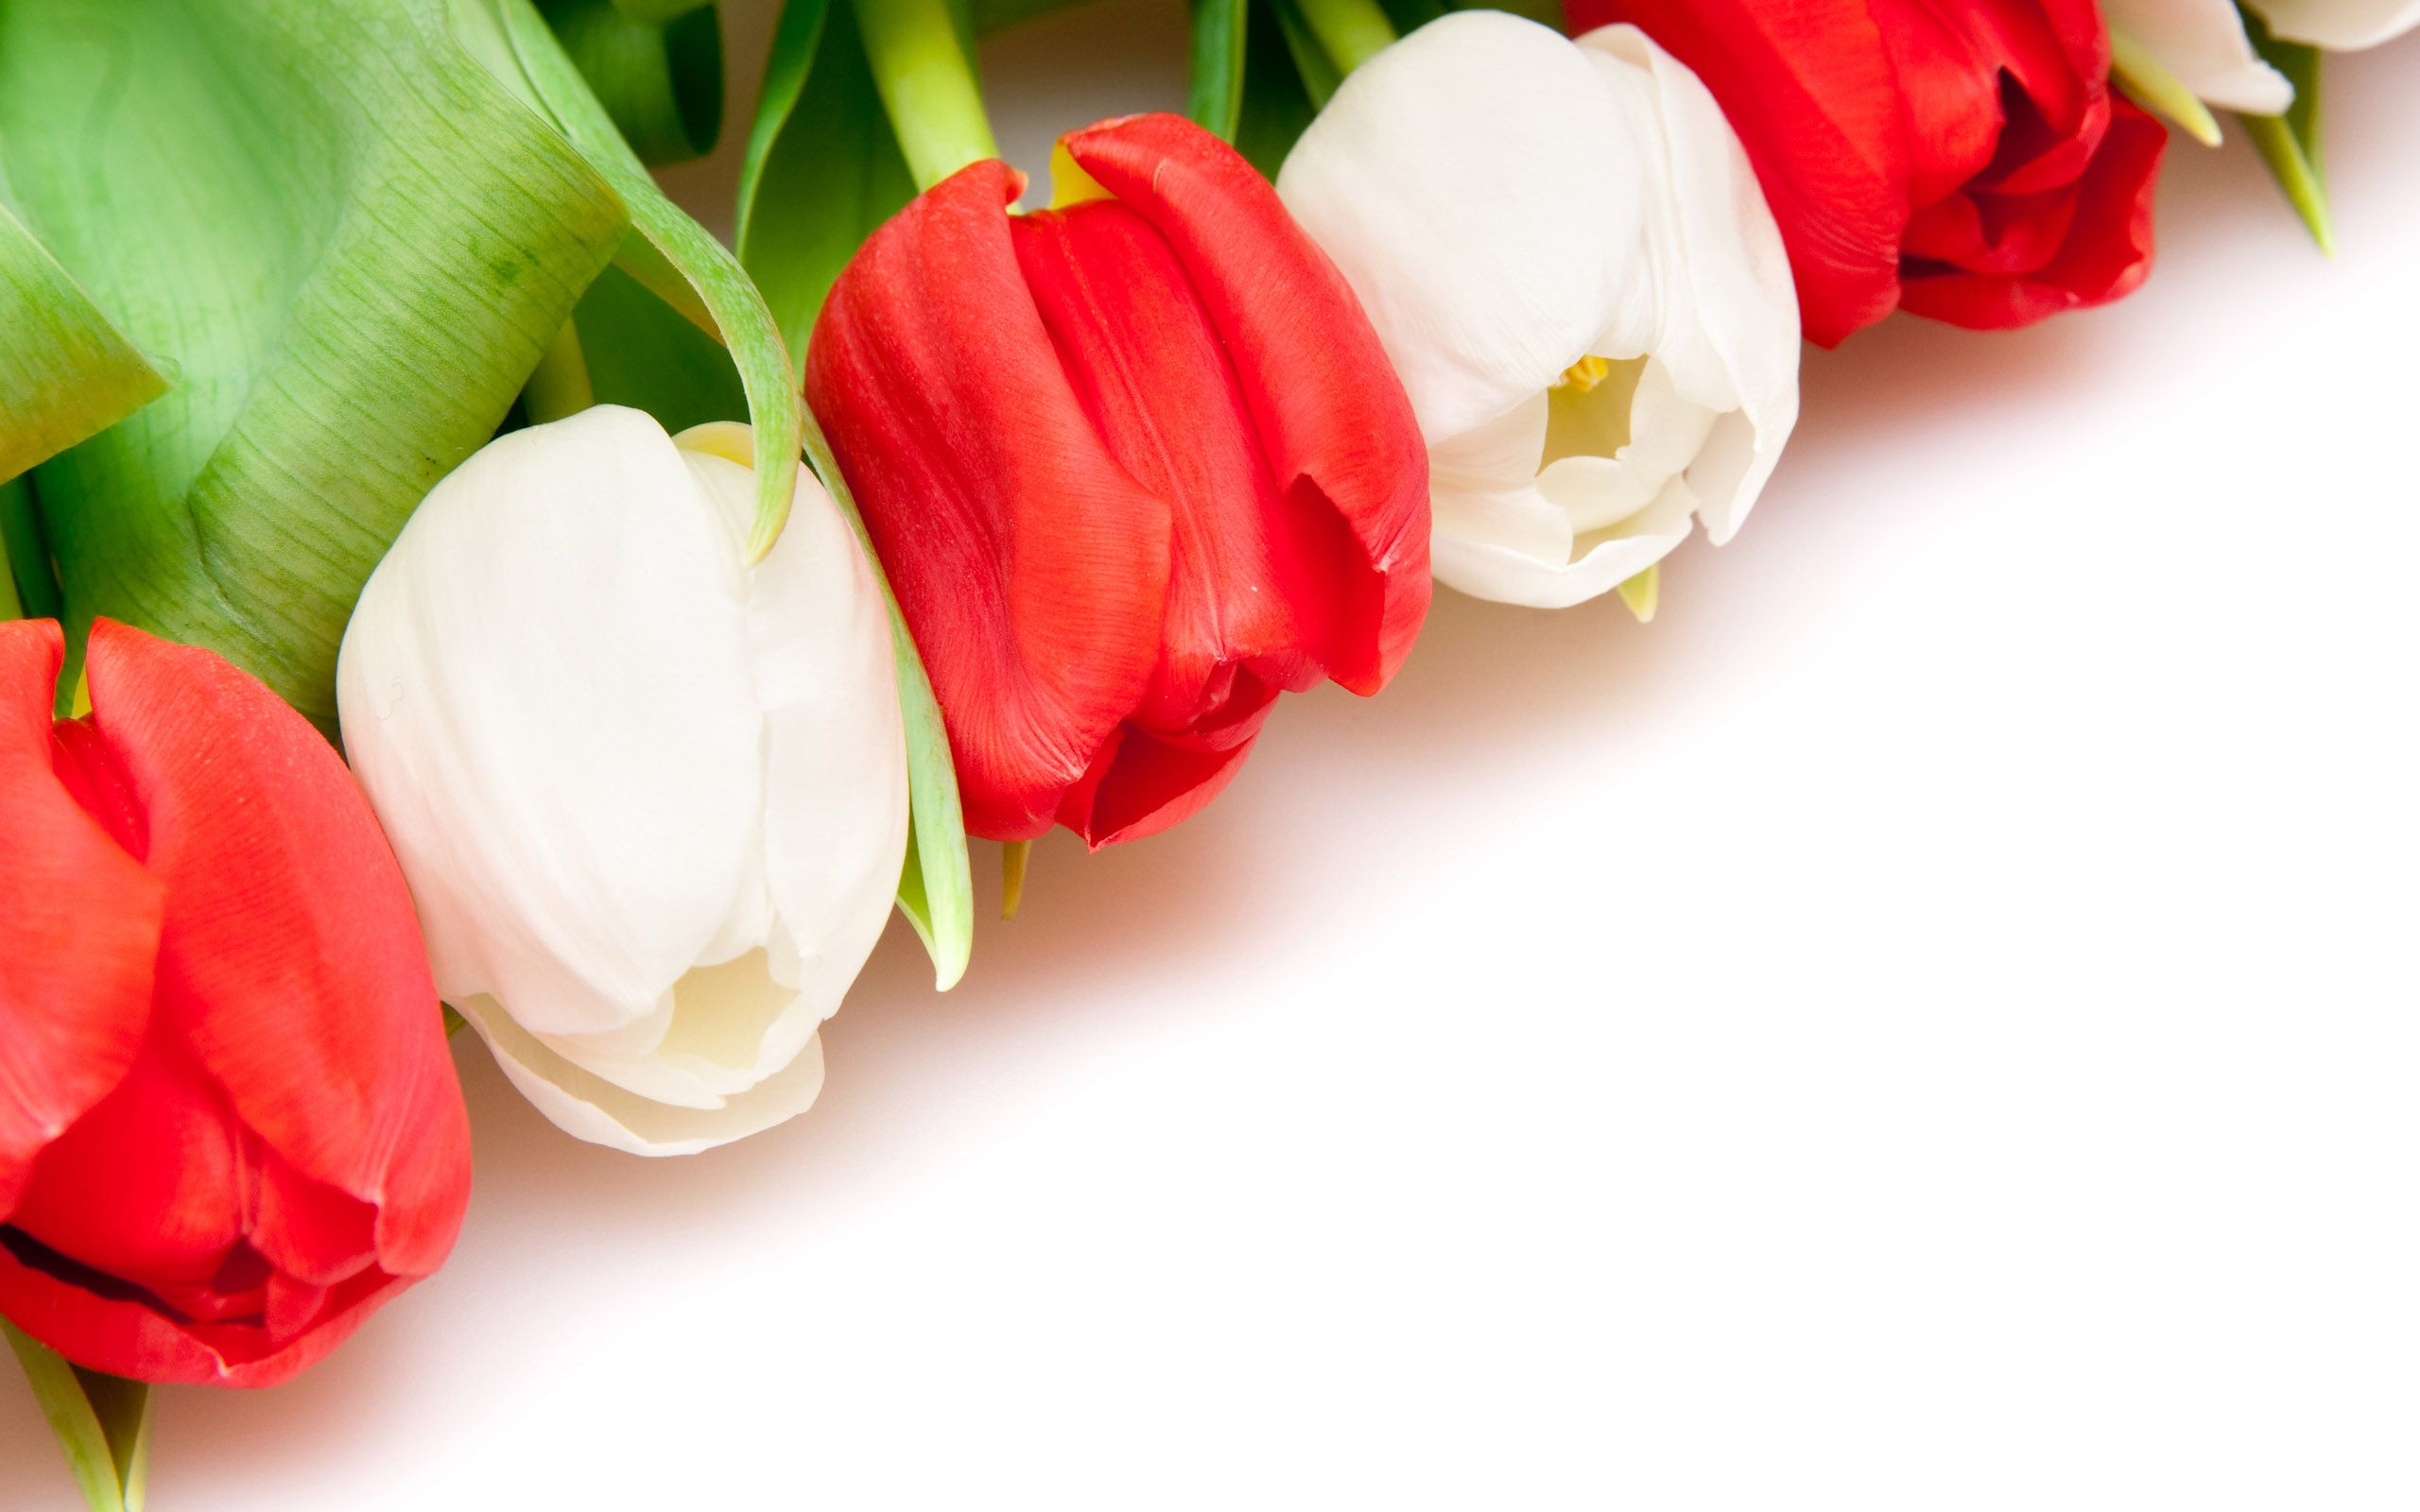 white tulip flowers images and wallpapers Download